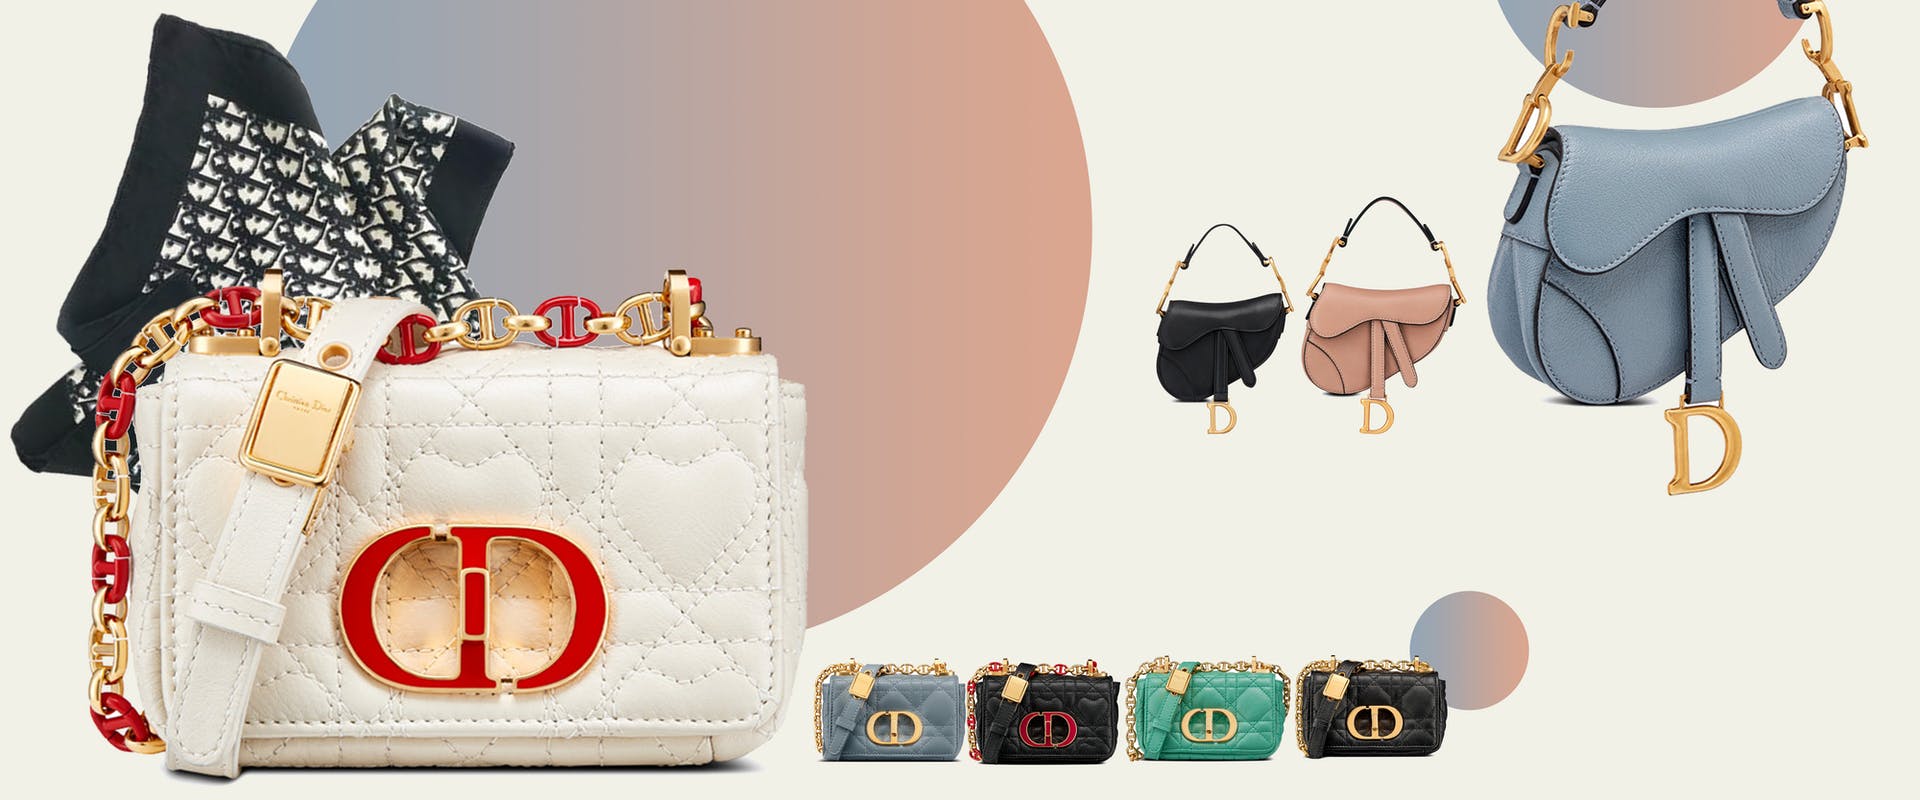 Dior Reinvents Its Iconic Bags into a Series of Miniature Versions